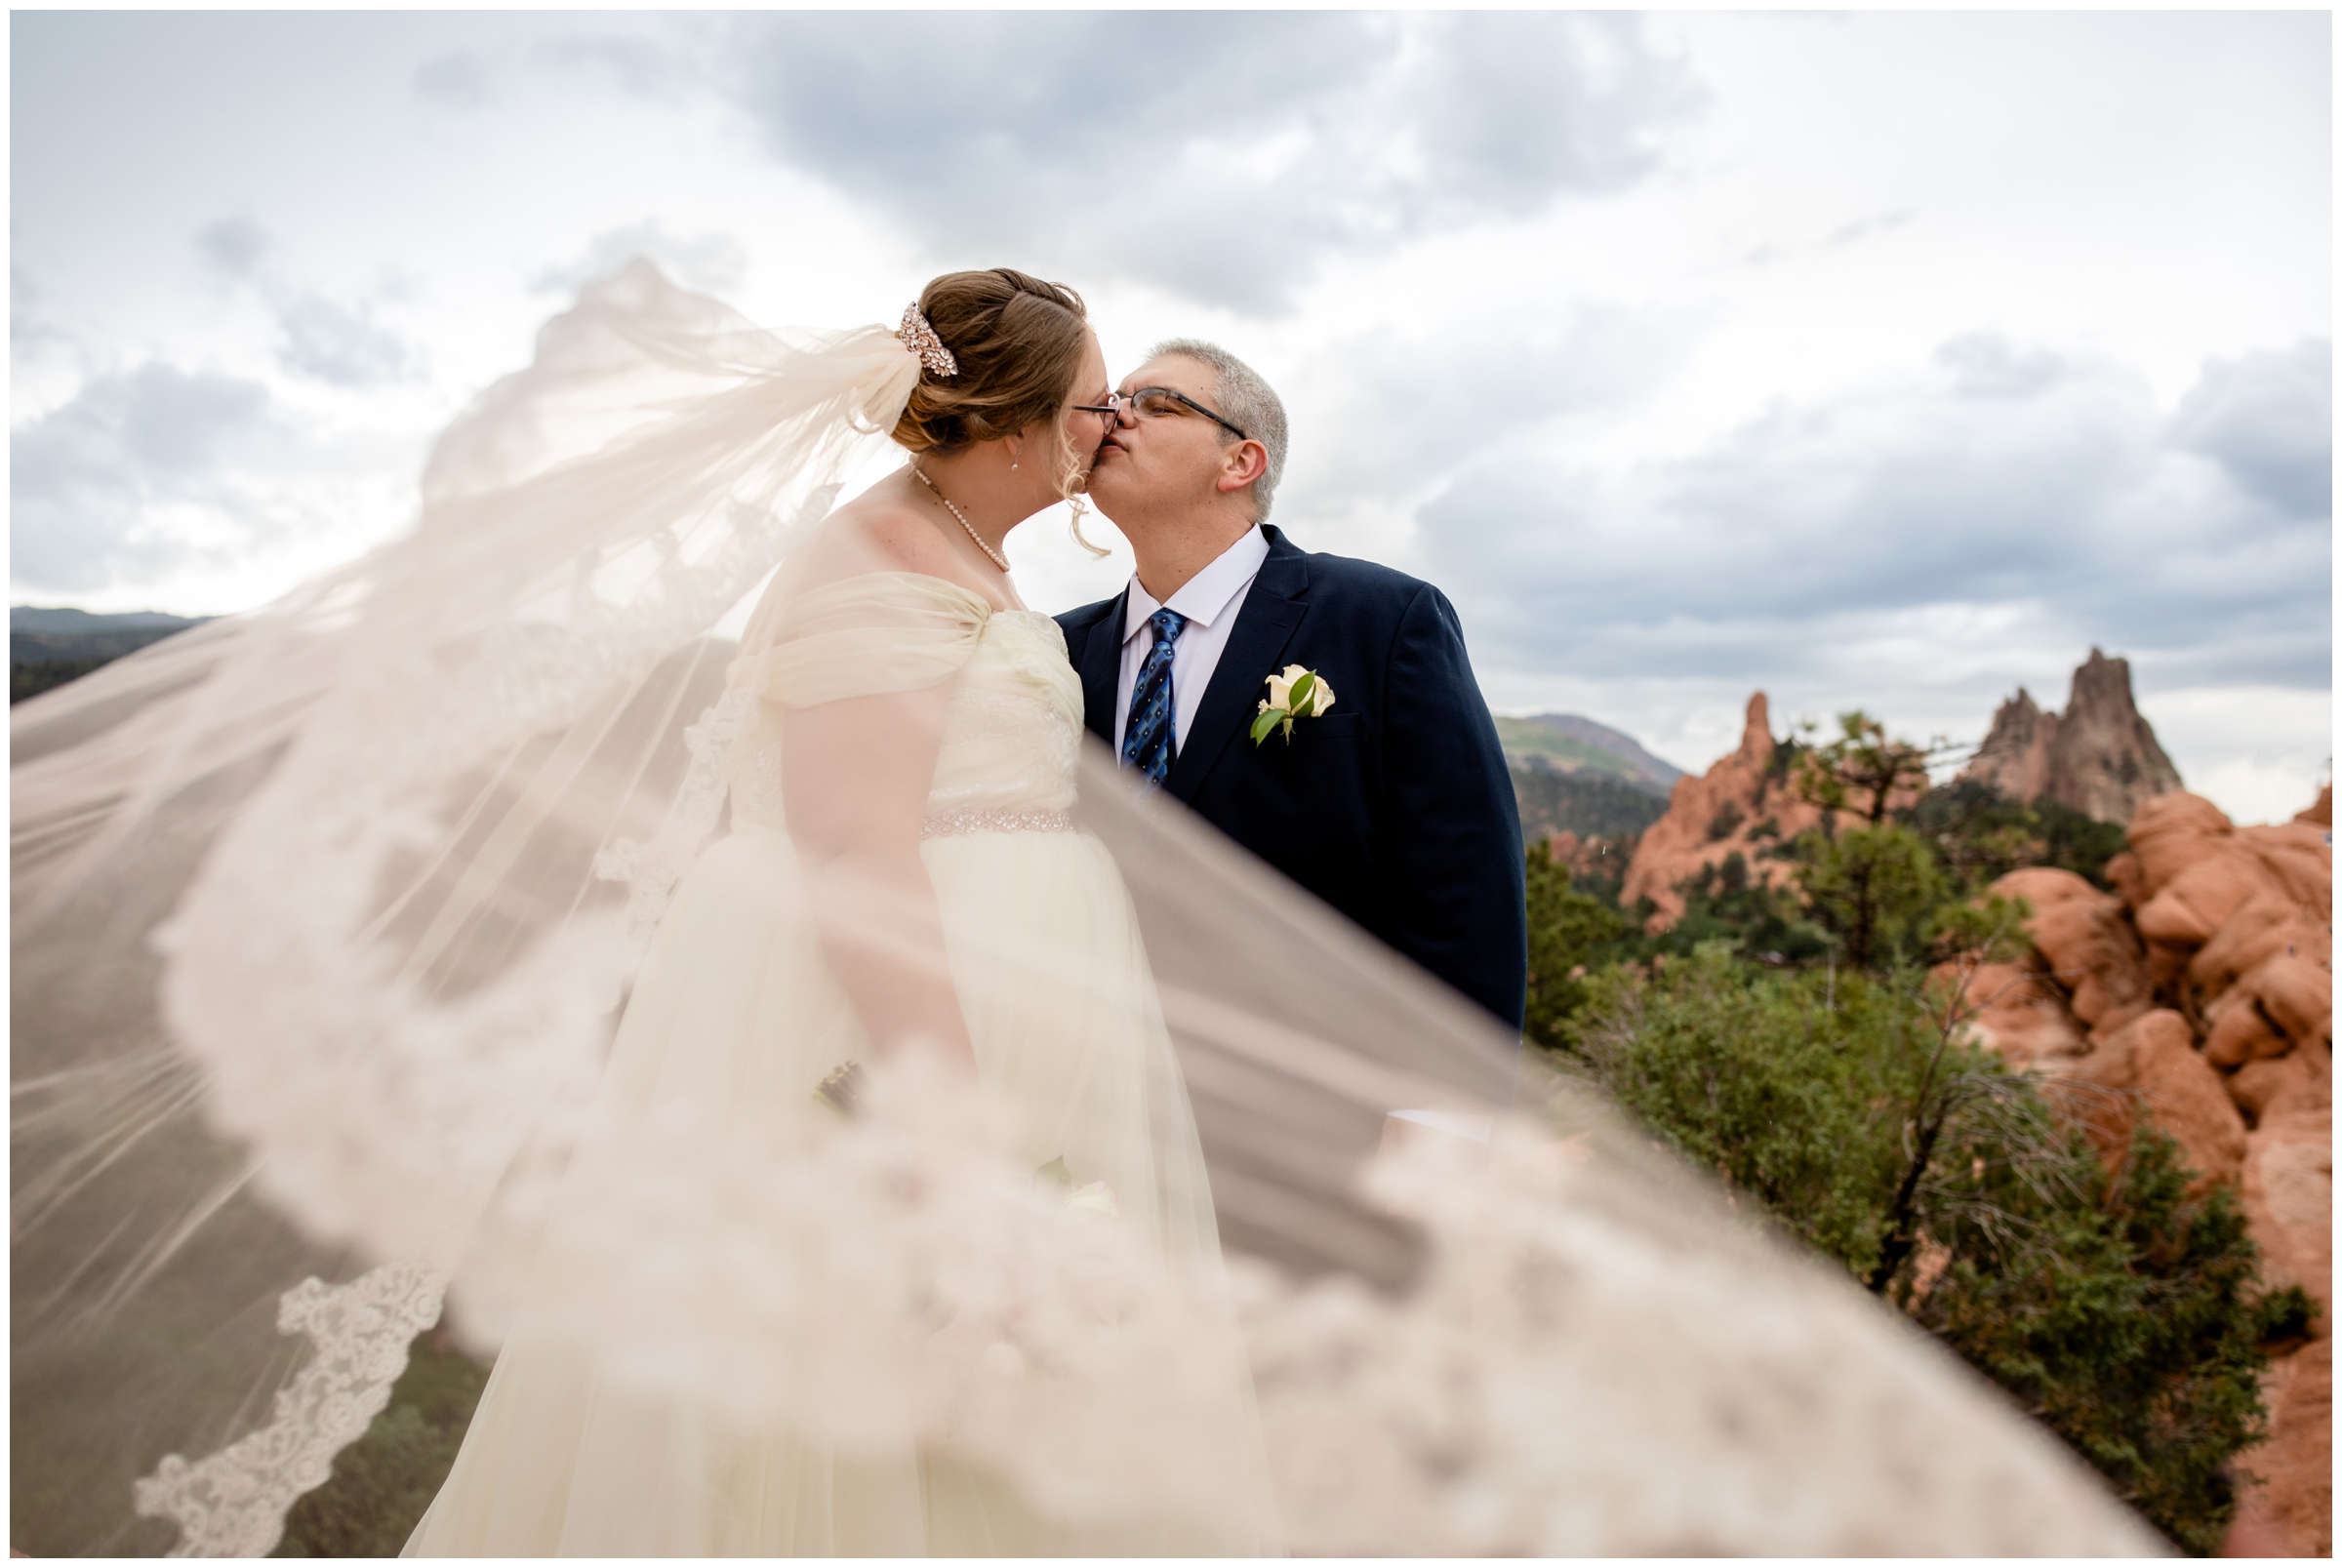 unique wedding photography with long veil at Garden of the Gods in Colorado Springs